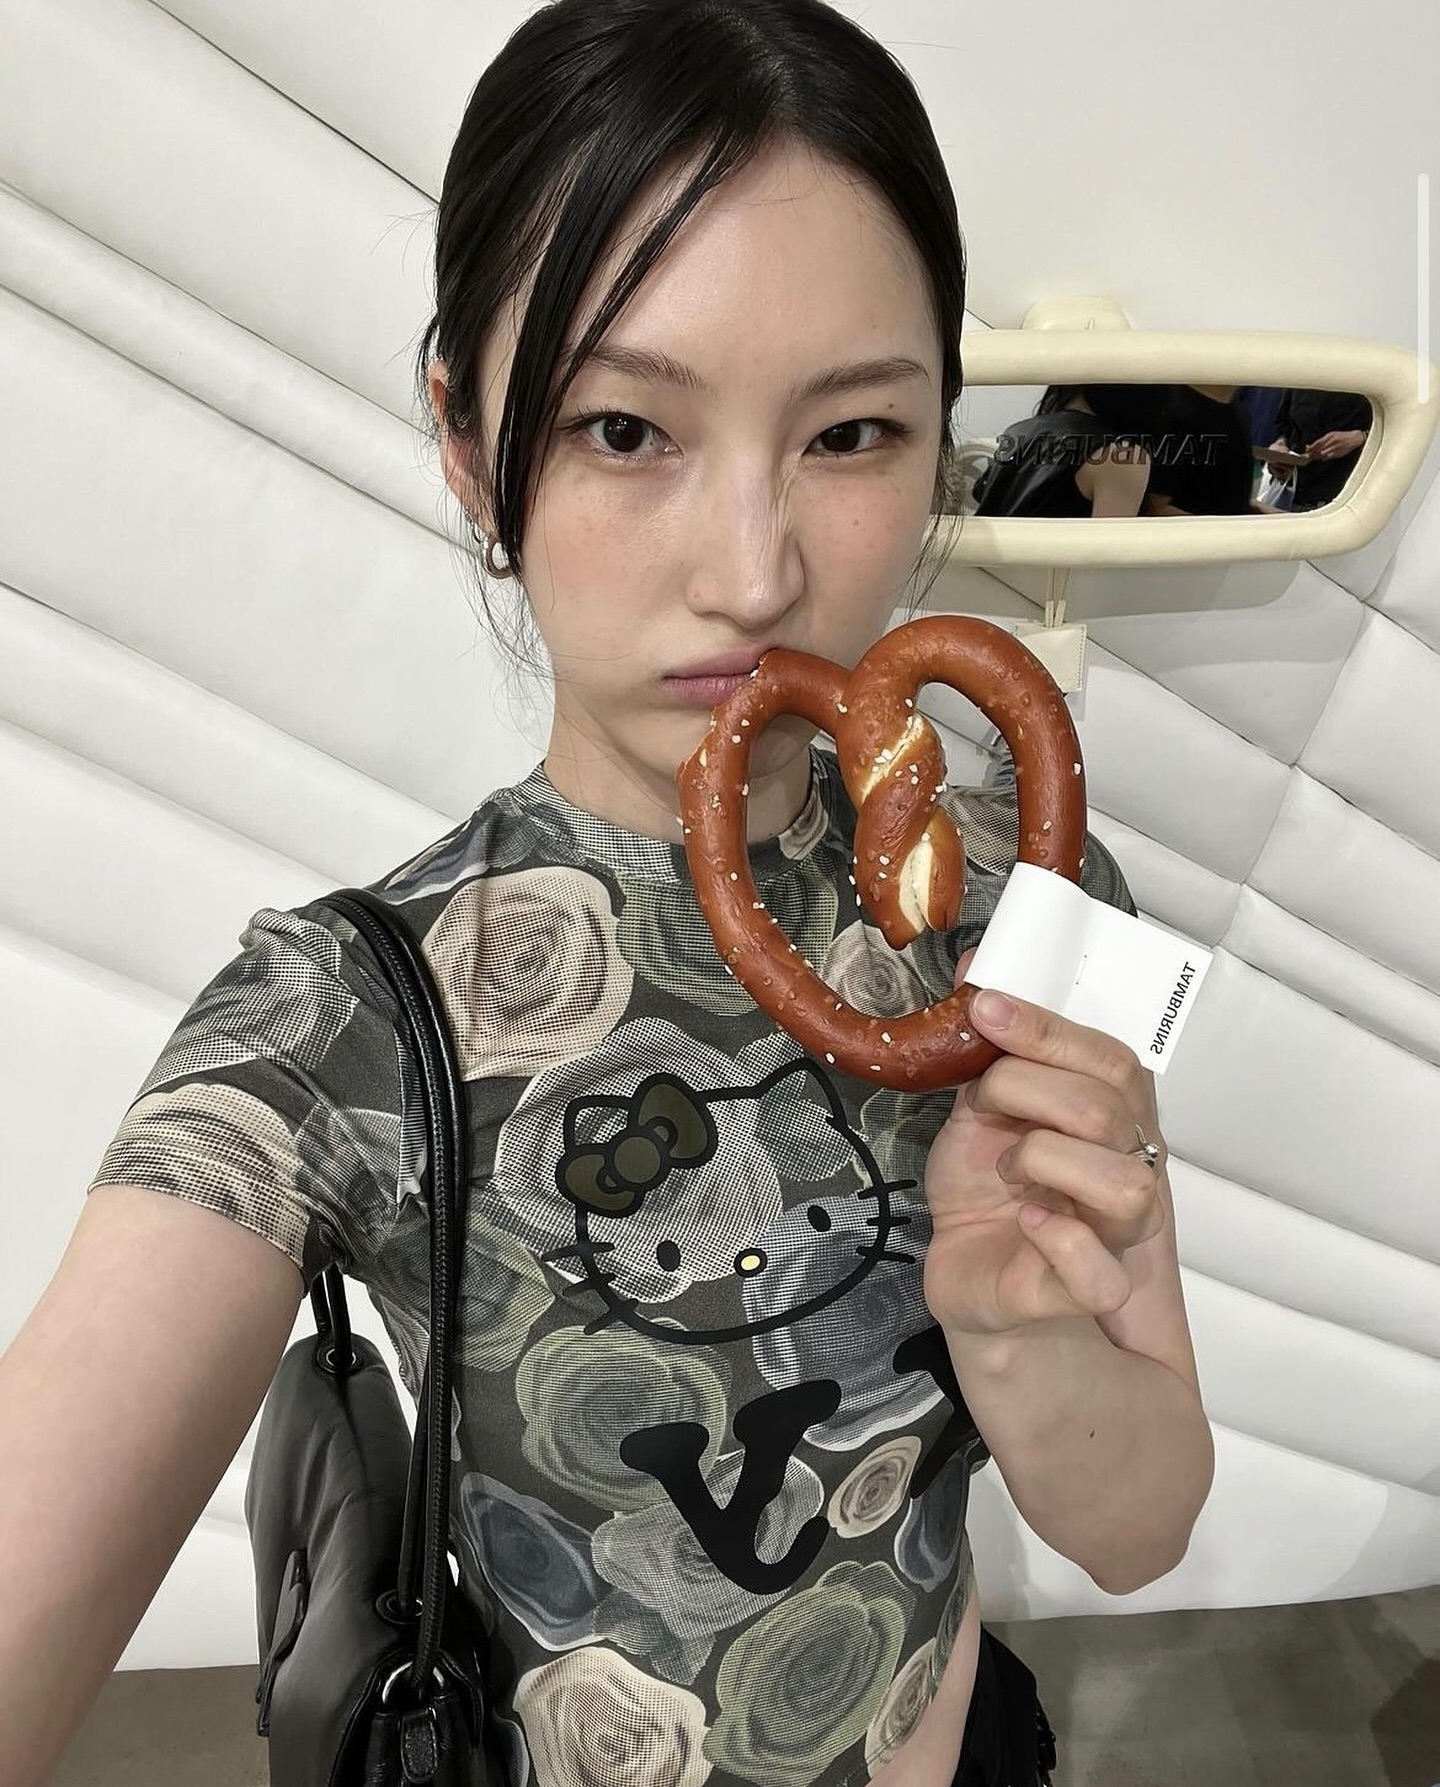 y-formerly-theopen-product-on-june-01-2024-tagging-osonghwa-may-be-an-image-of-1-person-pretzel-and-text-17206738979971633565795-1720888640702-17208886408531967330804.jpg